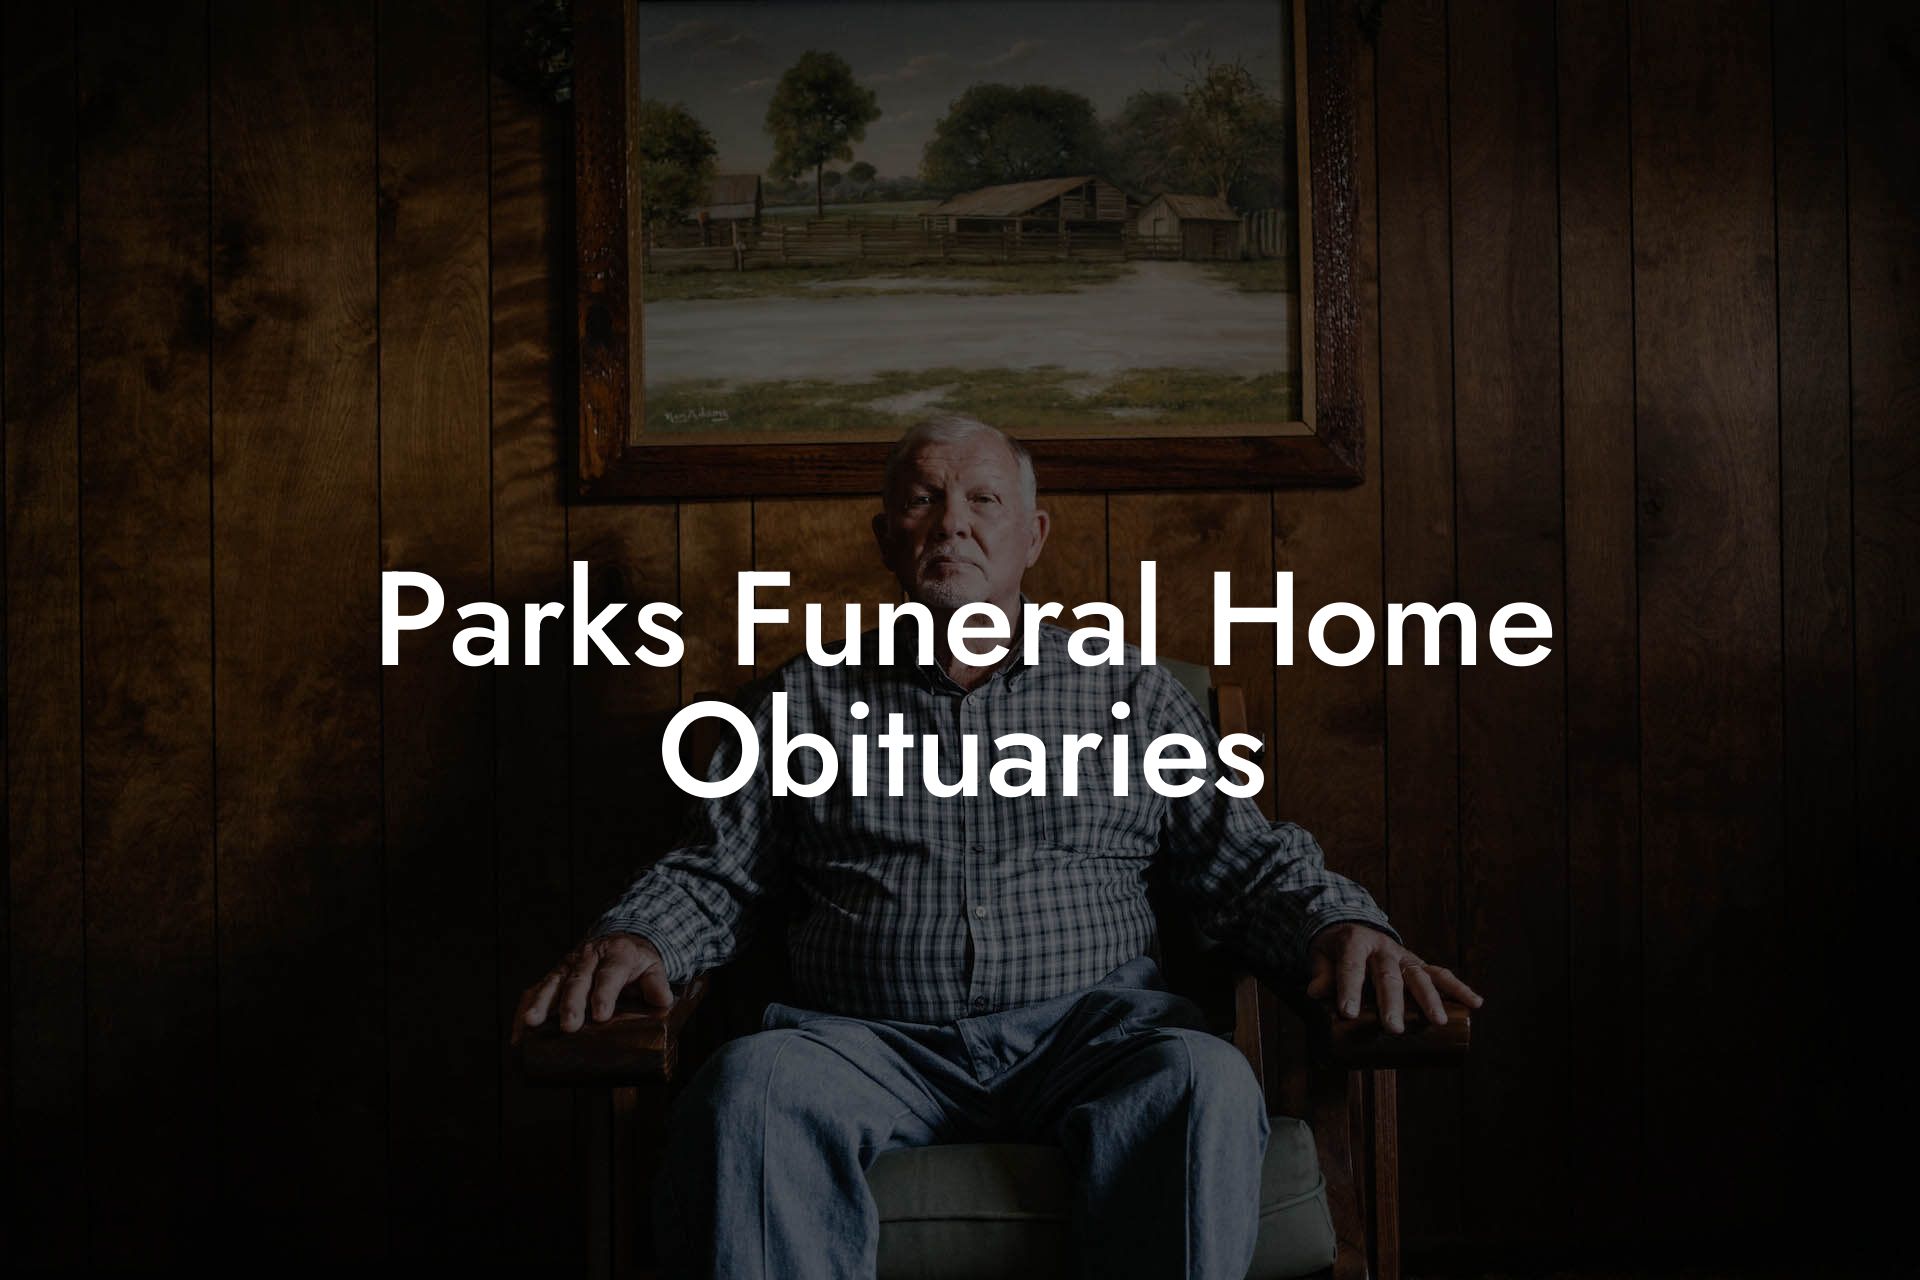 Parks Funeral Home Obituaries